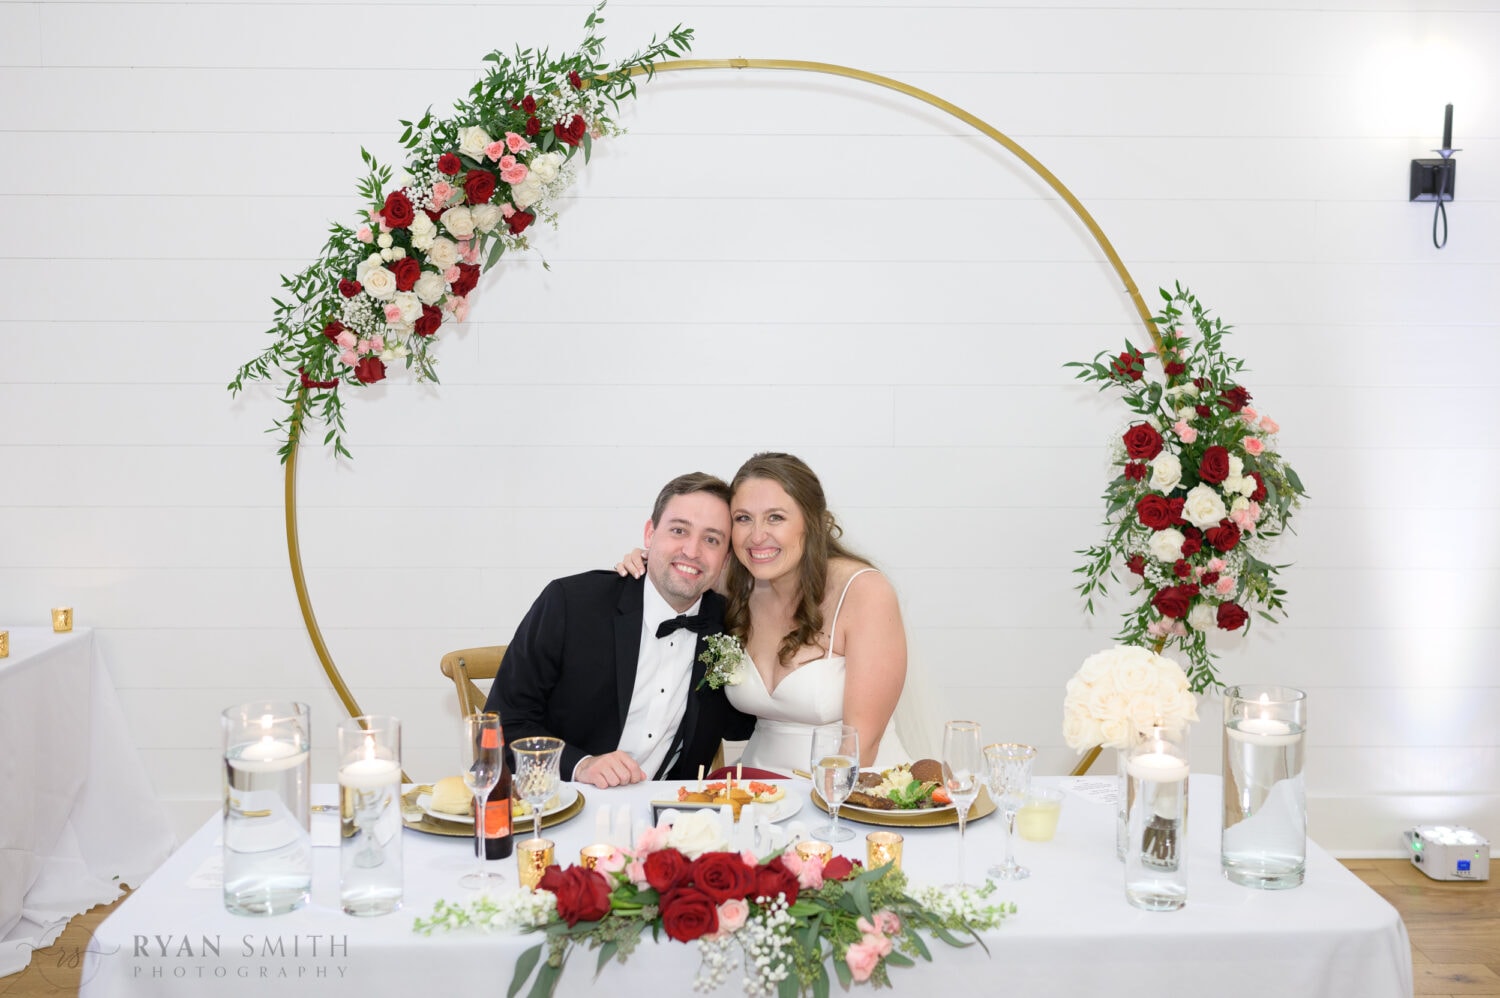 Happy bride and groom at the sweetheart table - The Venue at White Oaks Farm